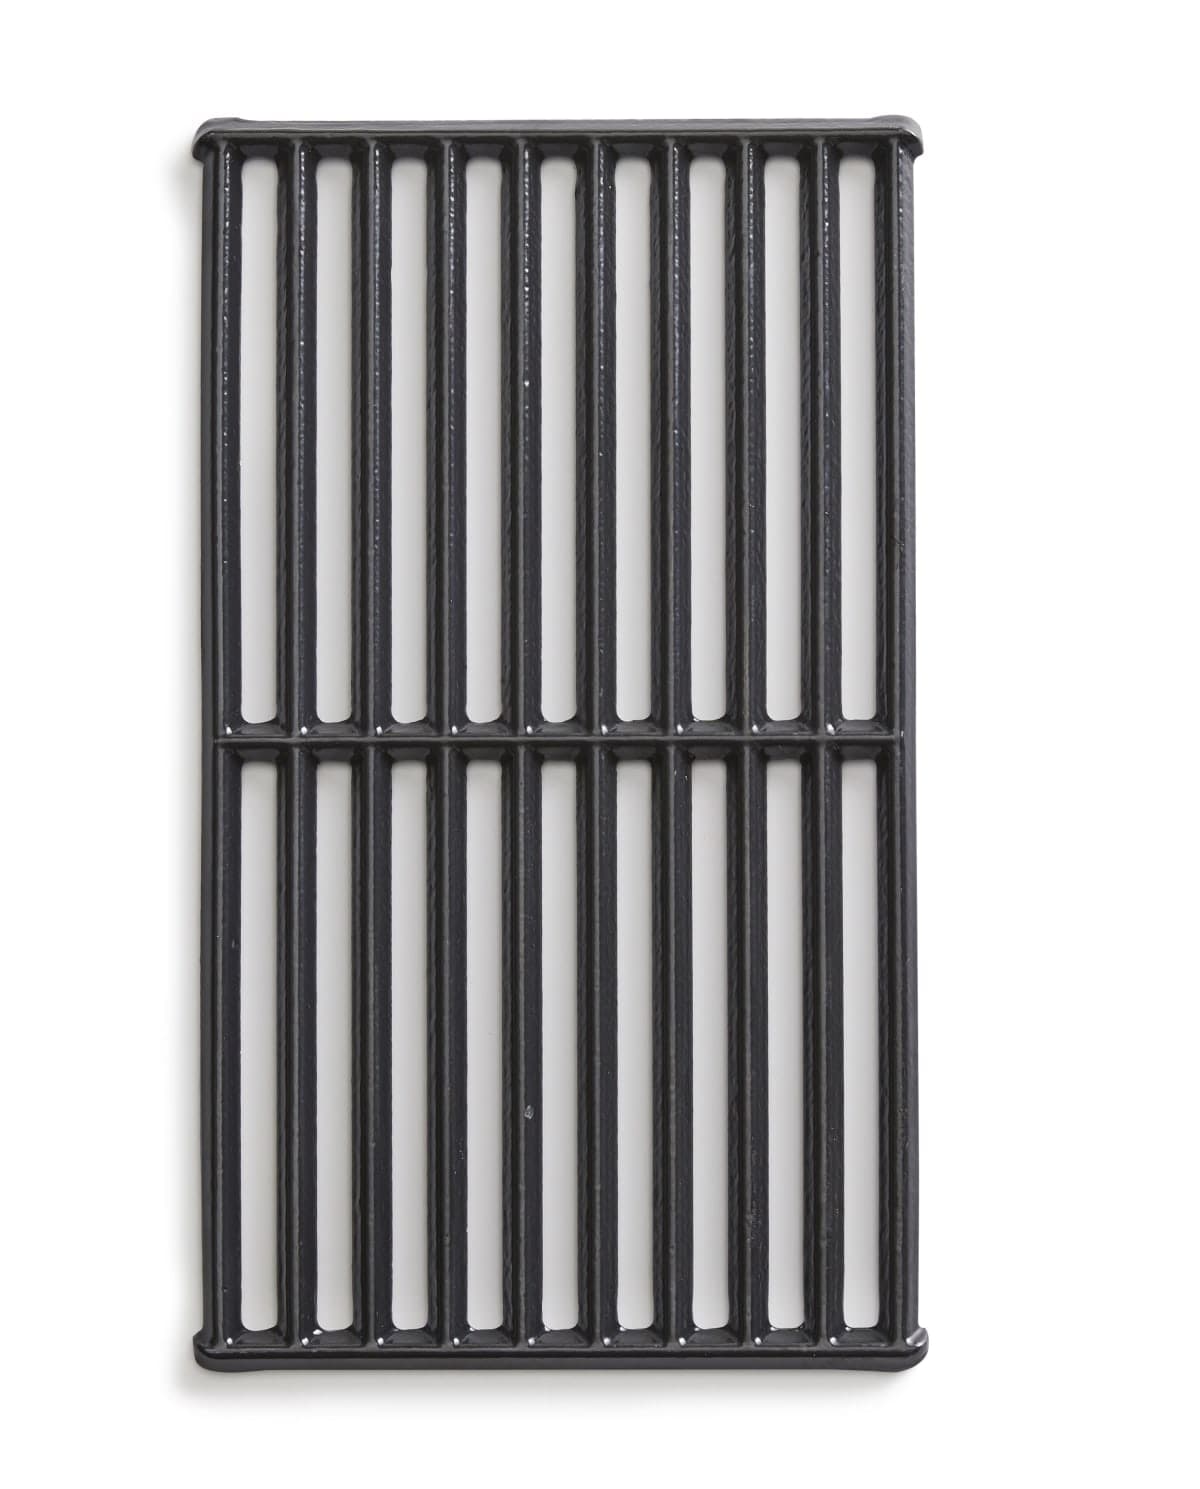 CAST IRON GRILL 41.5X24 FOR HUDSON GAS BBQ